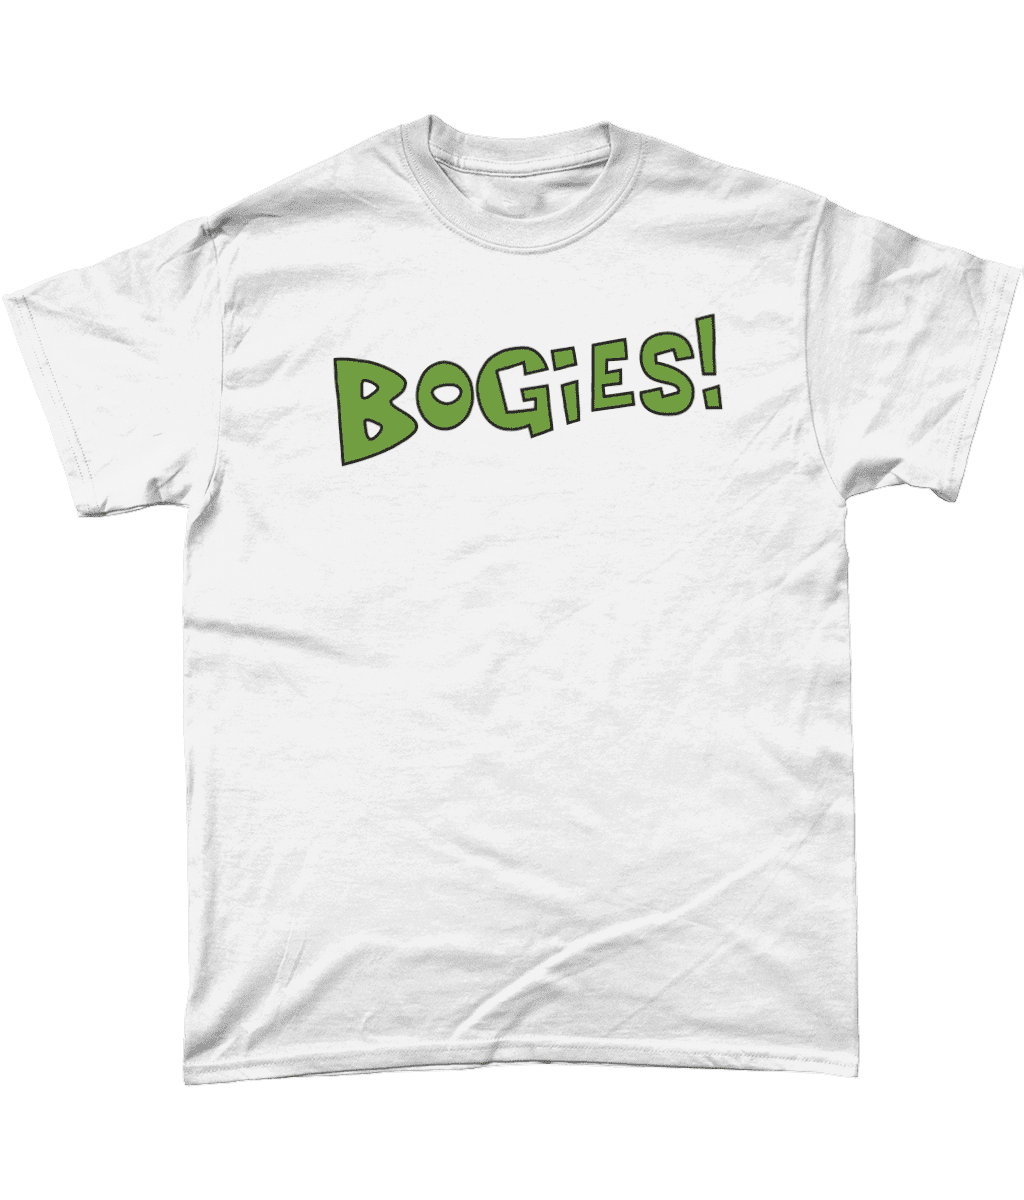 Bogies Dick and Dom T Shirt White